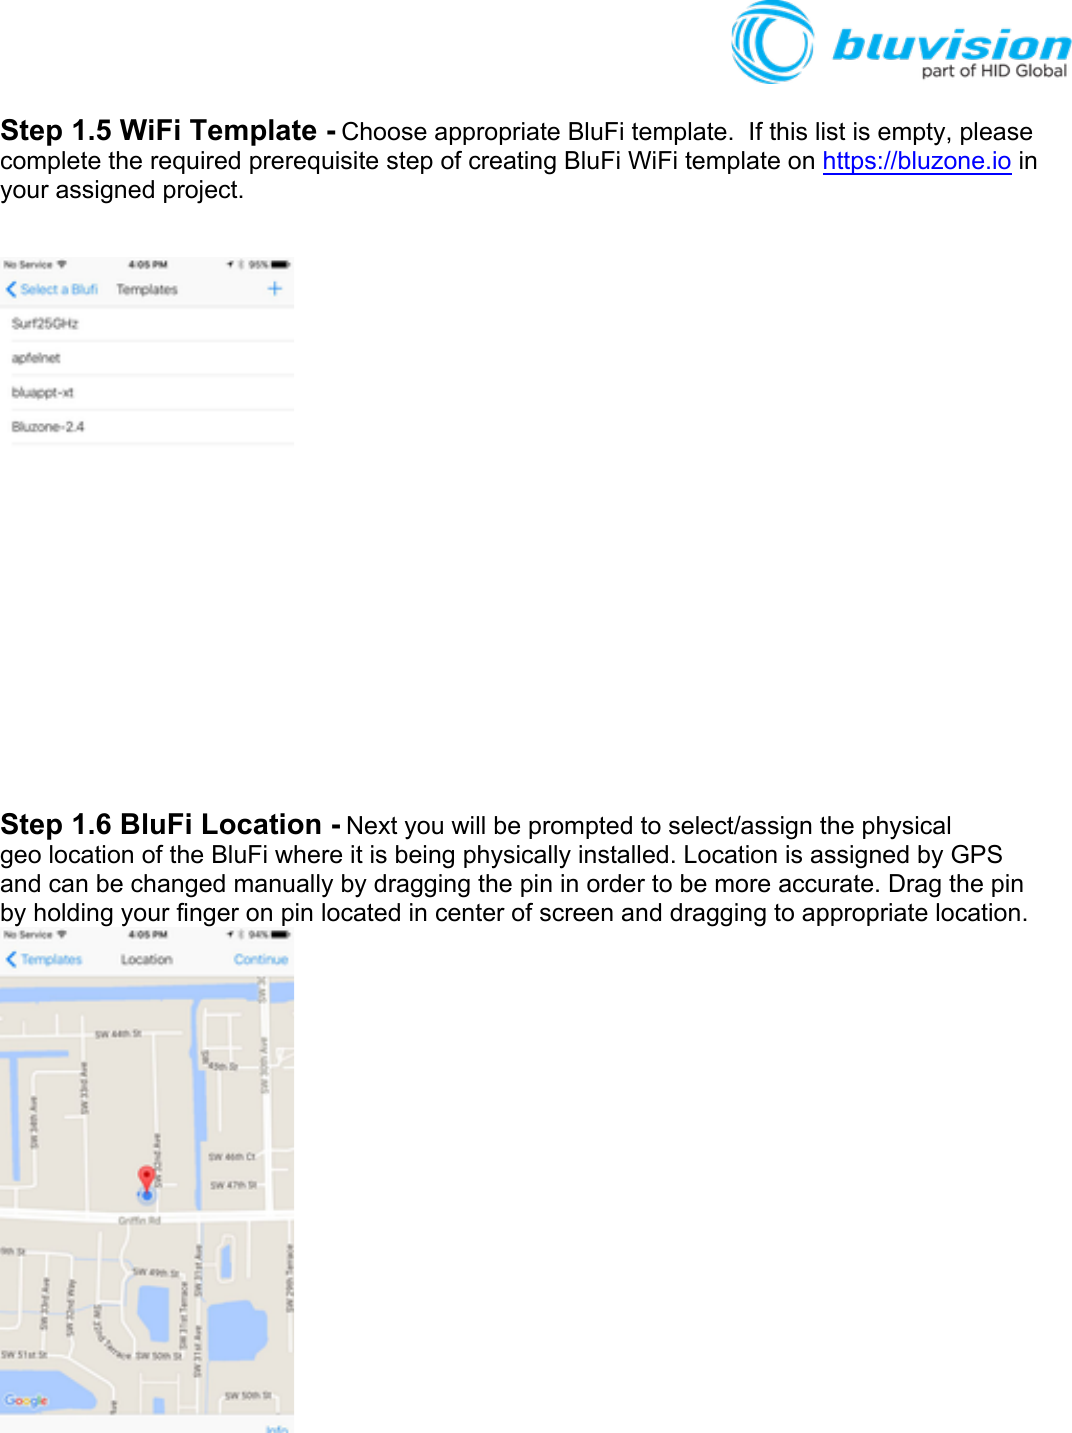 Step 1.5 WiFi Template - Choose appropriate BluFi template.  If this list is empty, please complete the required prerequisite step of creating BluFi WiFi template on https://bluzone.io in your assigned project.   Step 1.6 BluFi Location - Next you will be prompted to select/assign the physical geo location of the BluFi where it is being physically installed. Location is assigned by GPS and can be changed manually by dragging the pin in order to be more accurate. Drag the pin by holding your finger on pin located in center of screen and dragging to appropriate location.   